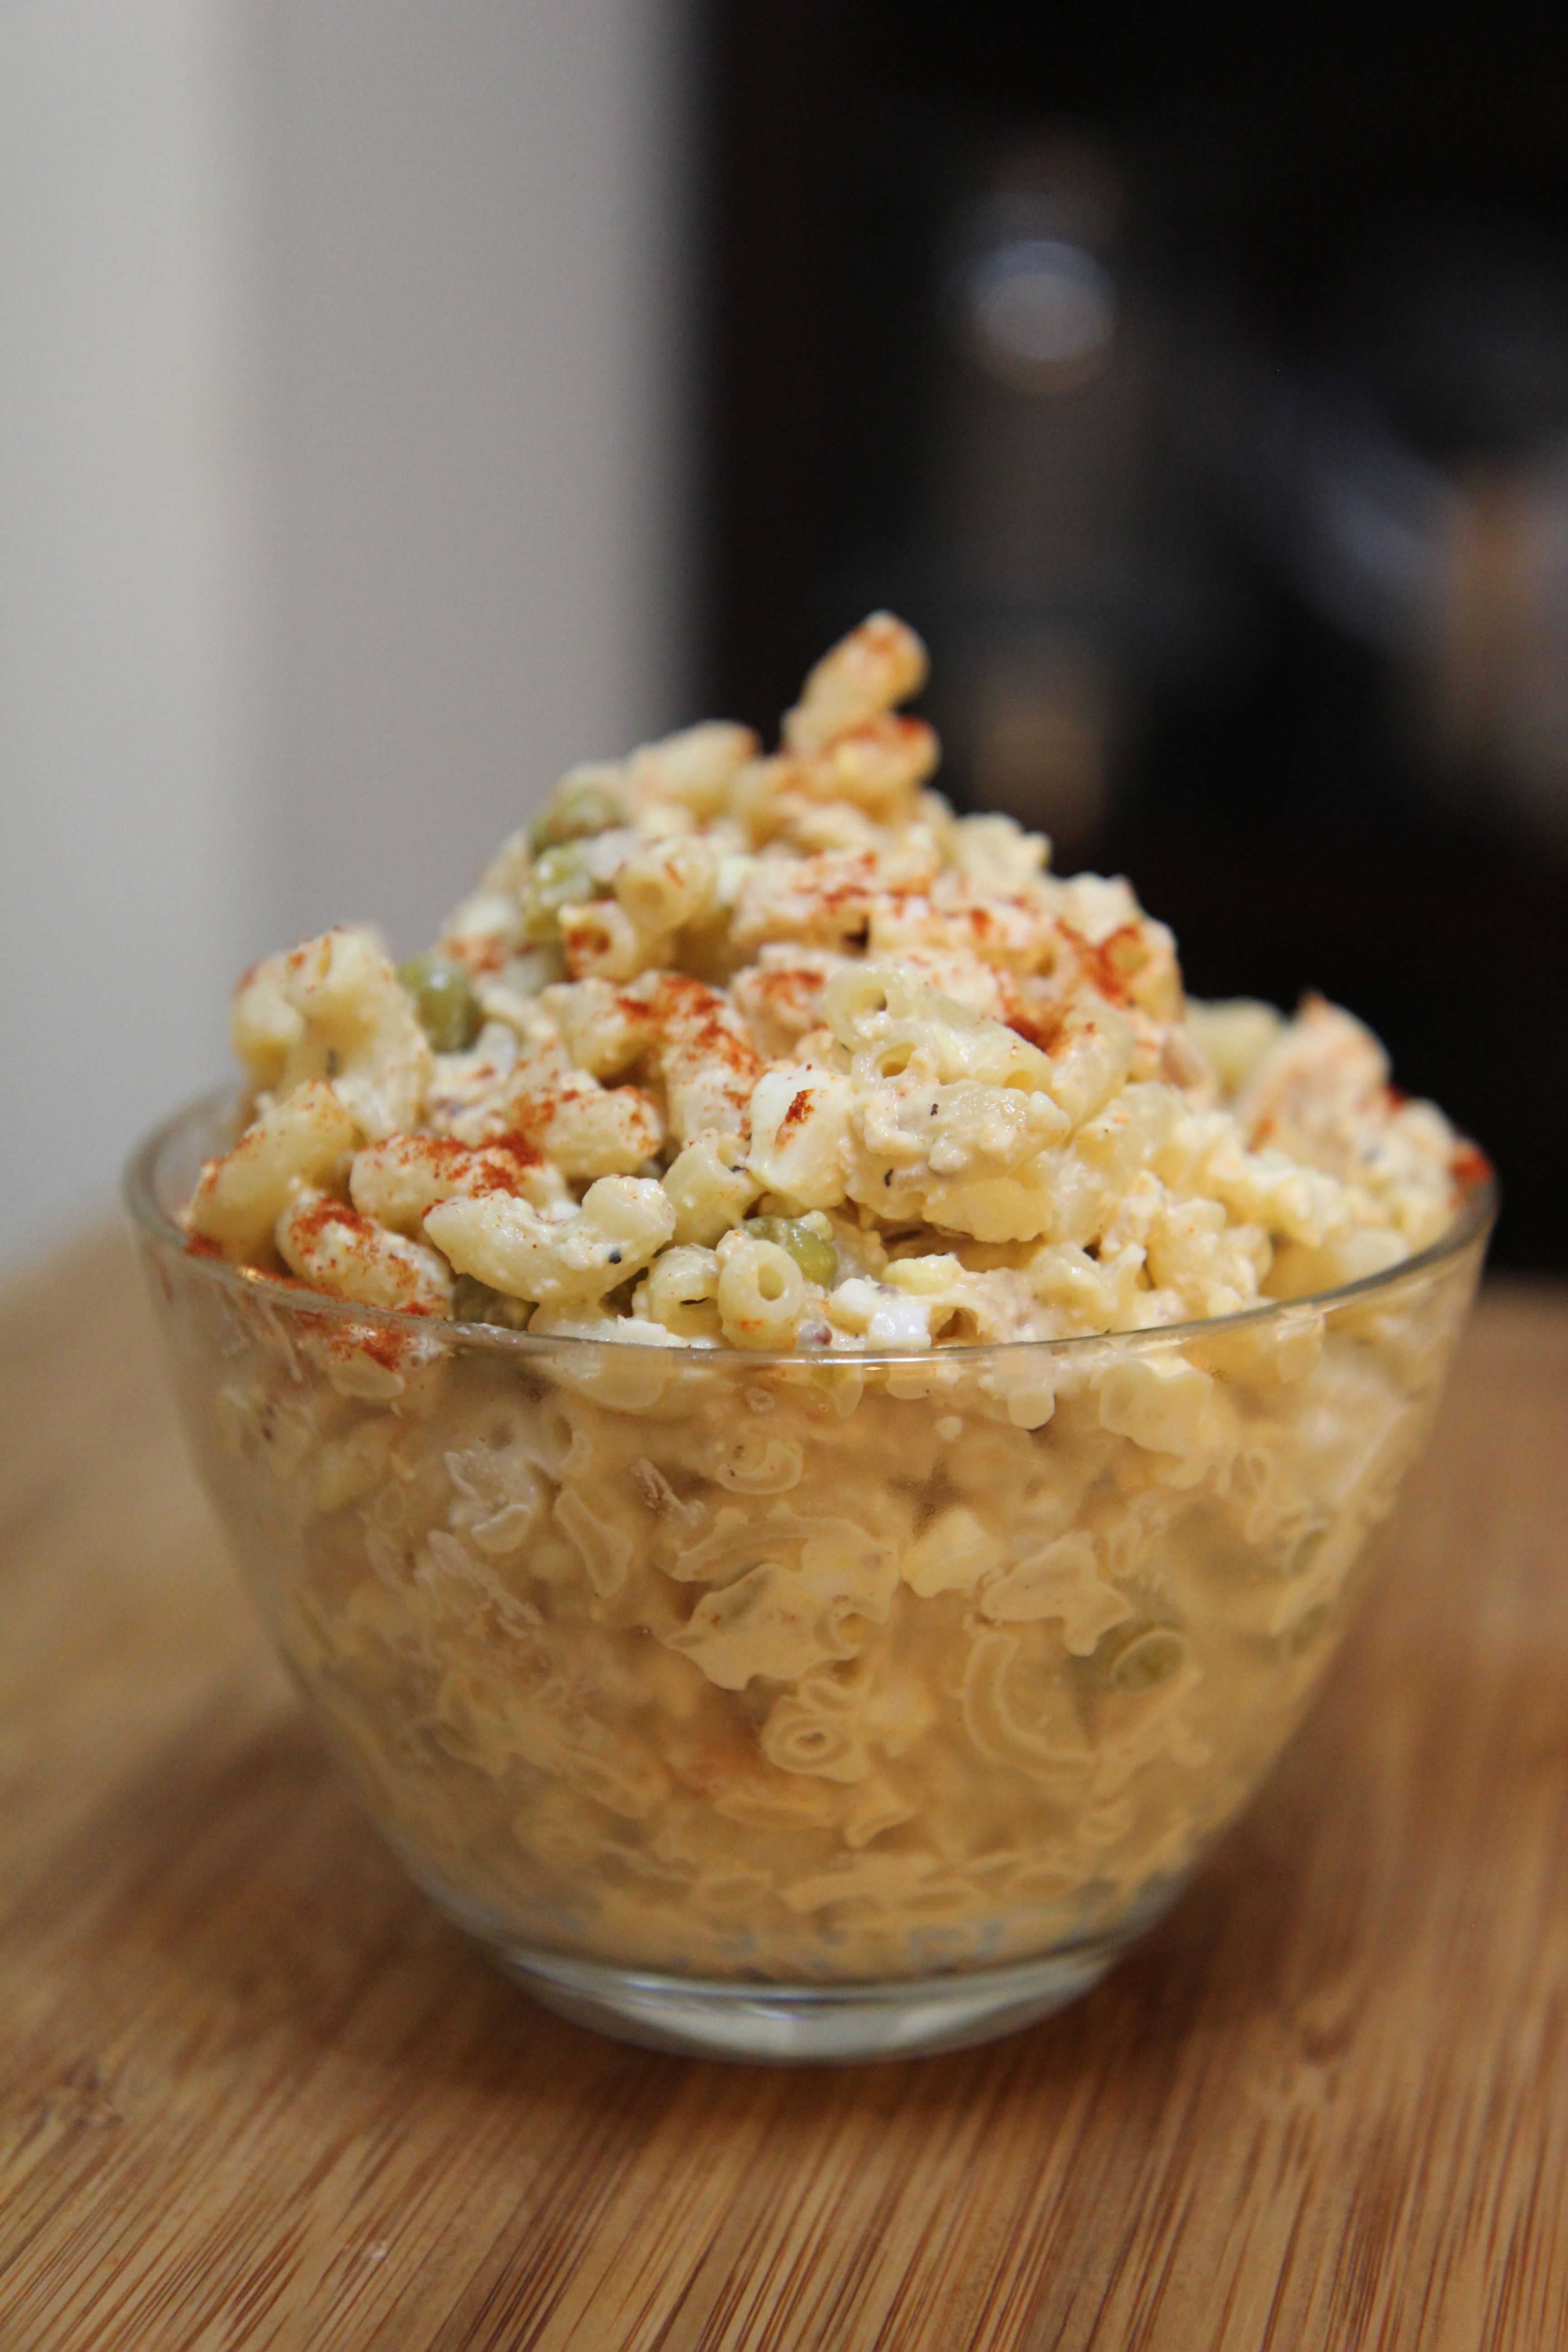 Macaroni tuna salad with crisp celery and creamy mayo topped with a little sprinkle of paprika